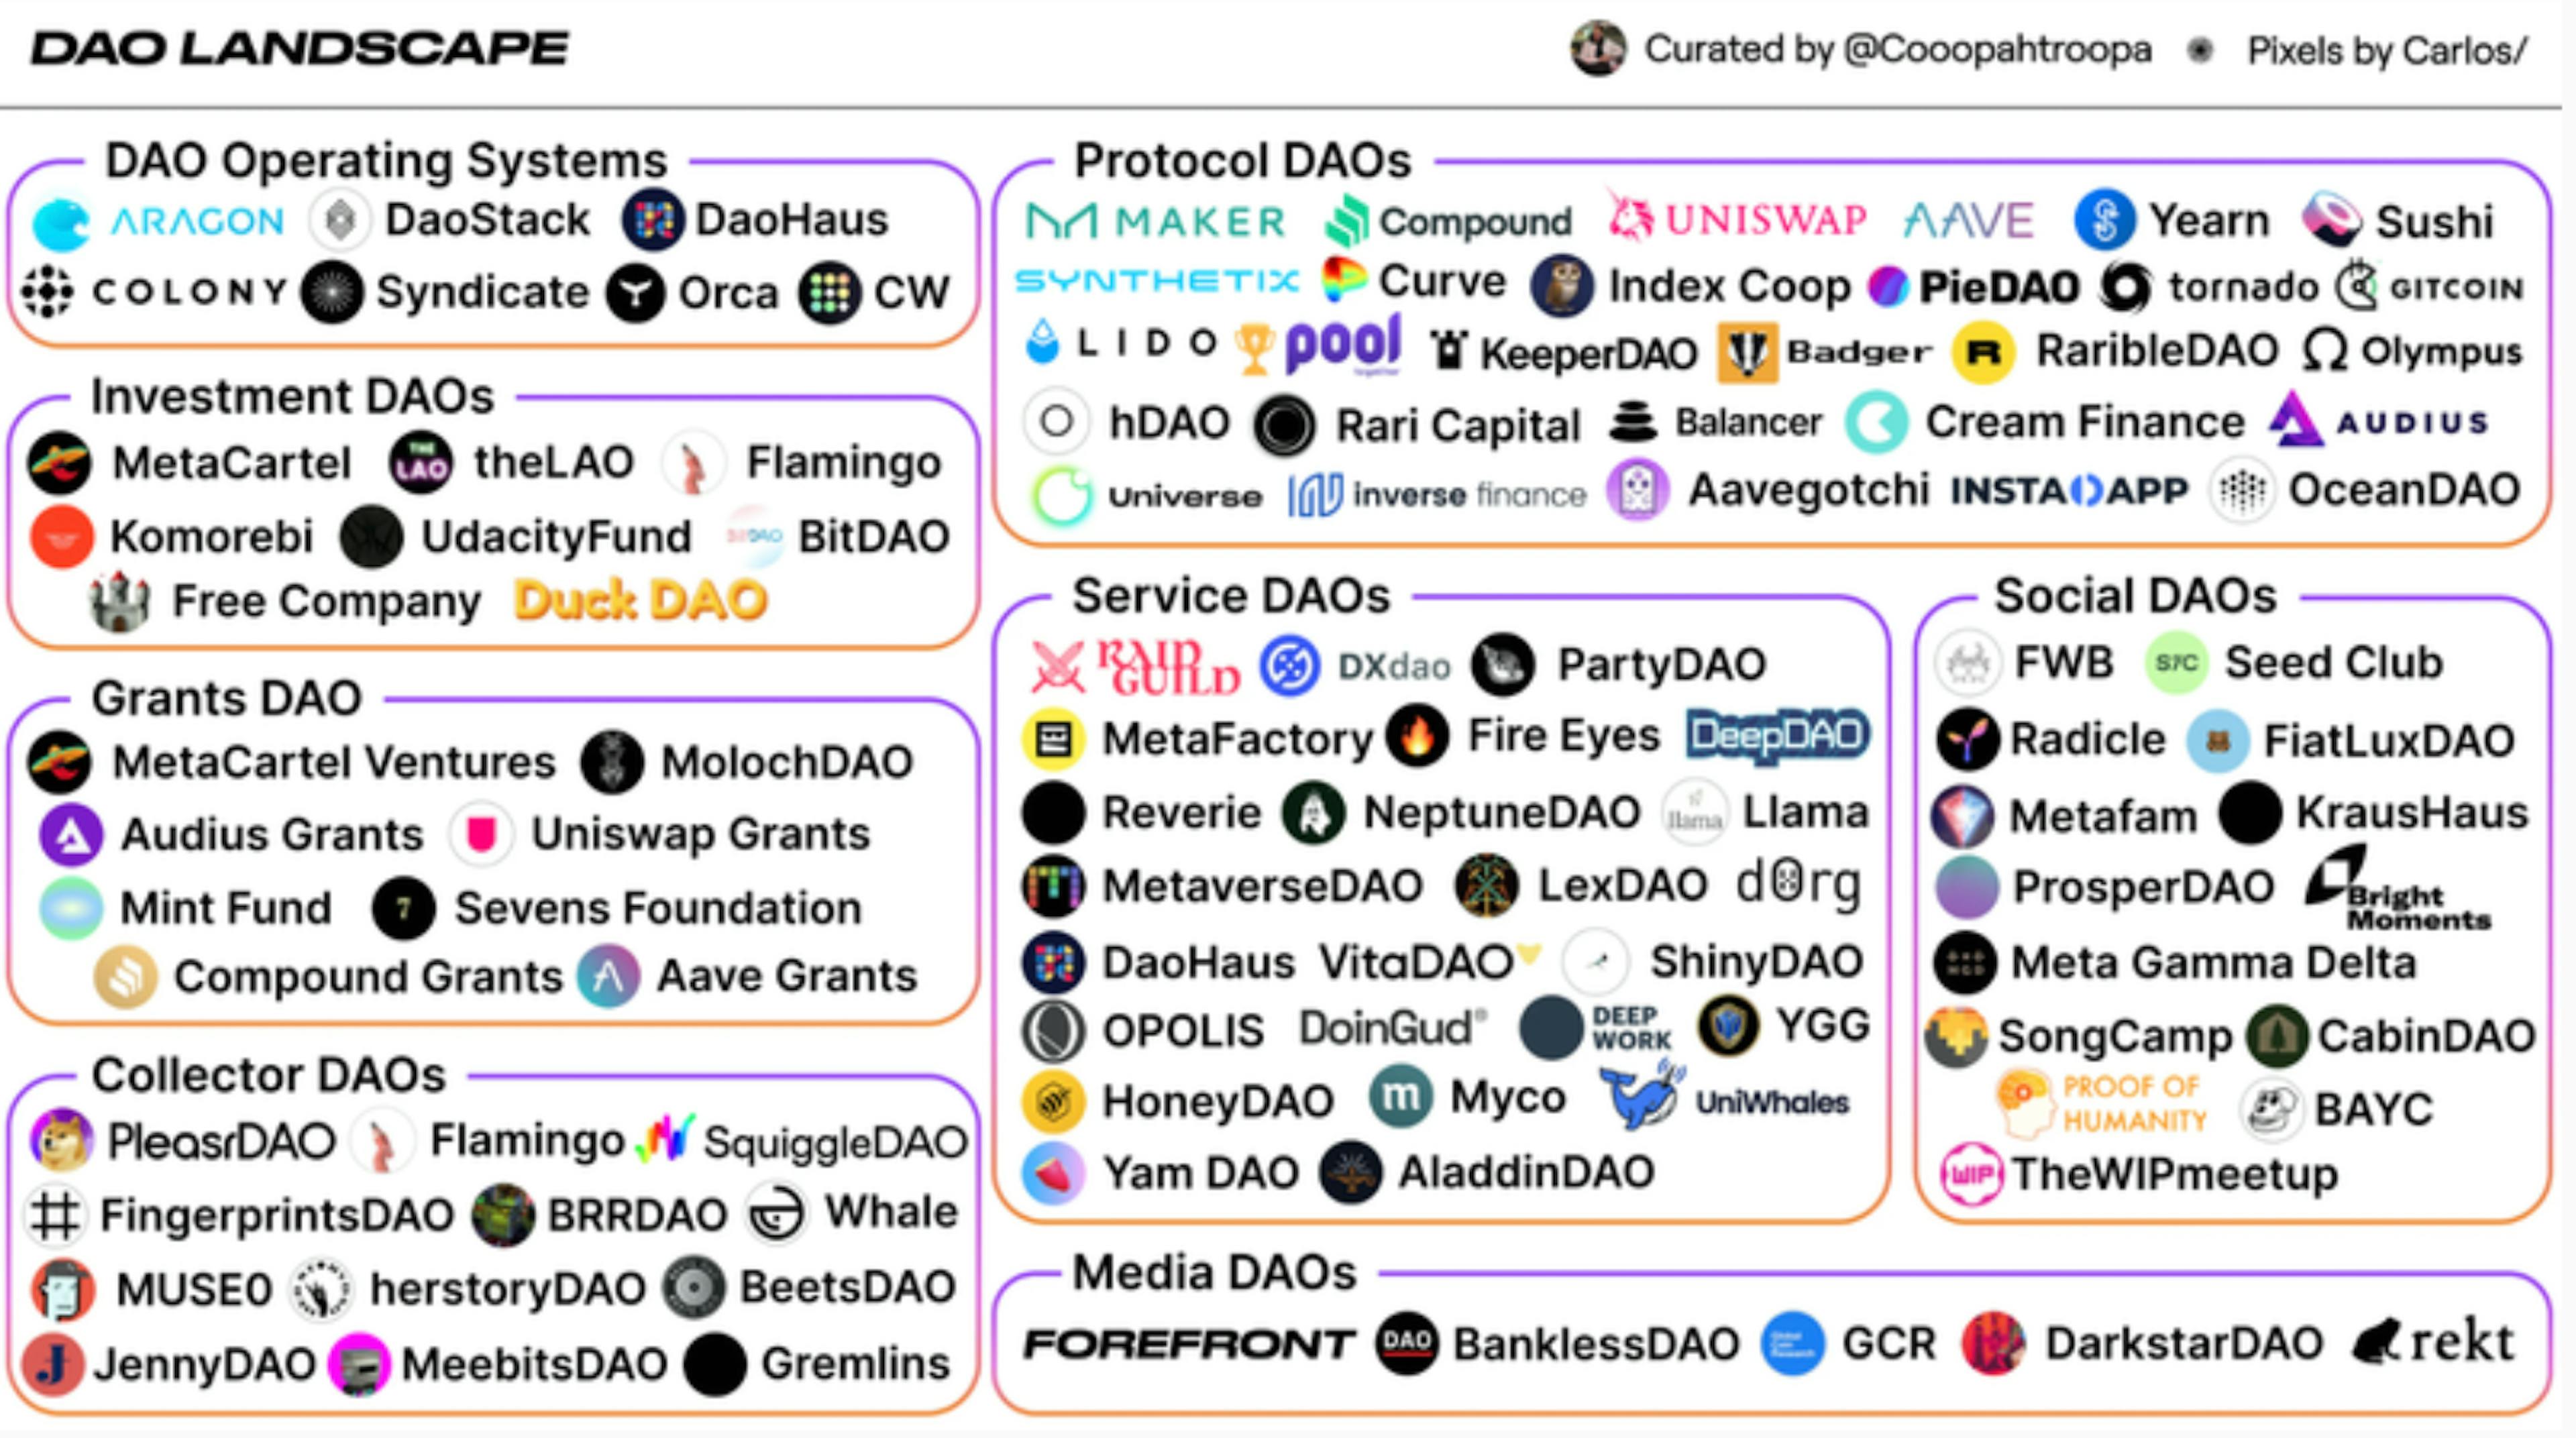 The DAO landscape by https://twitter.com/Cooopahtroopa